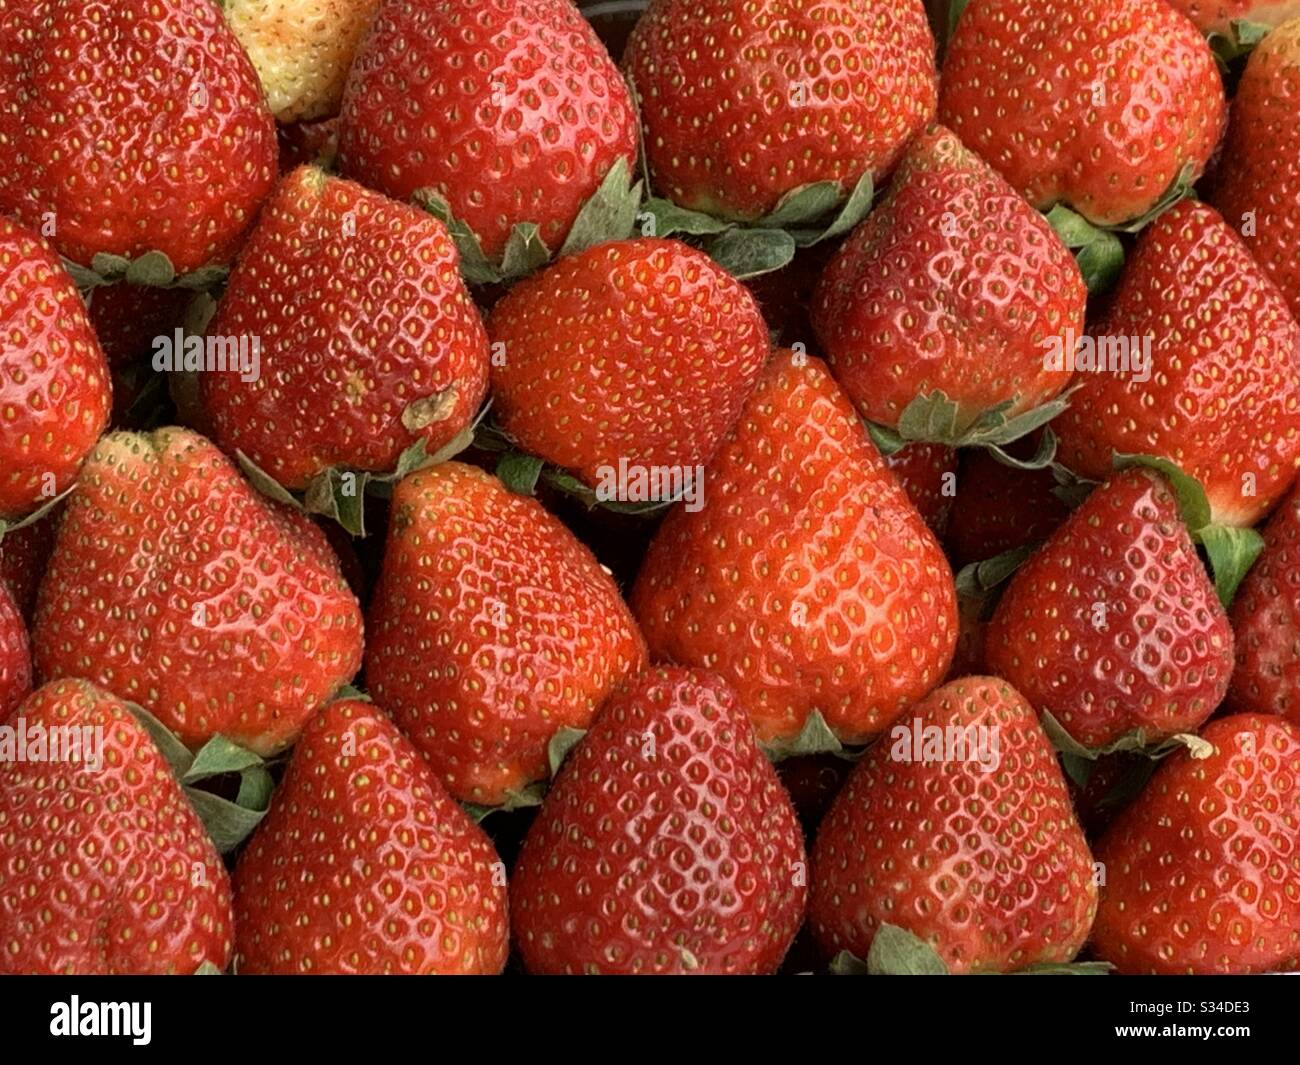 Freshly harvested strawberries are neatly arranged for selling in the market. What a plump and juicy treat! Stock Photo